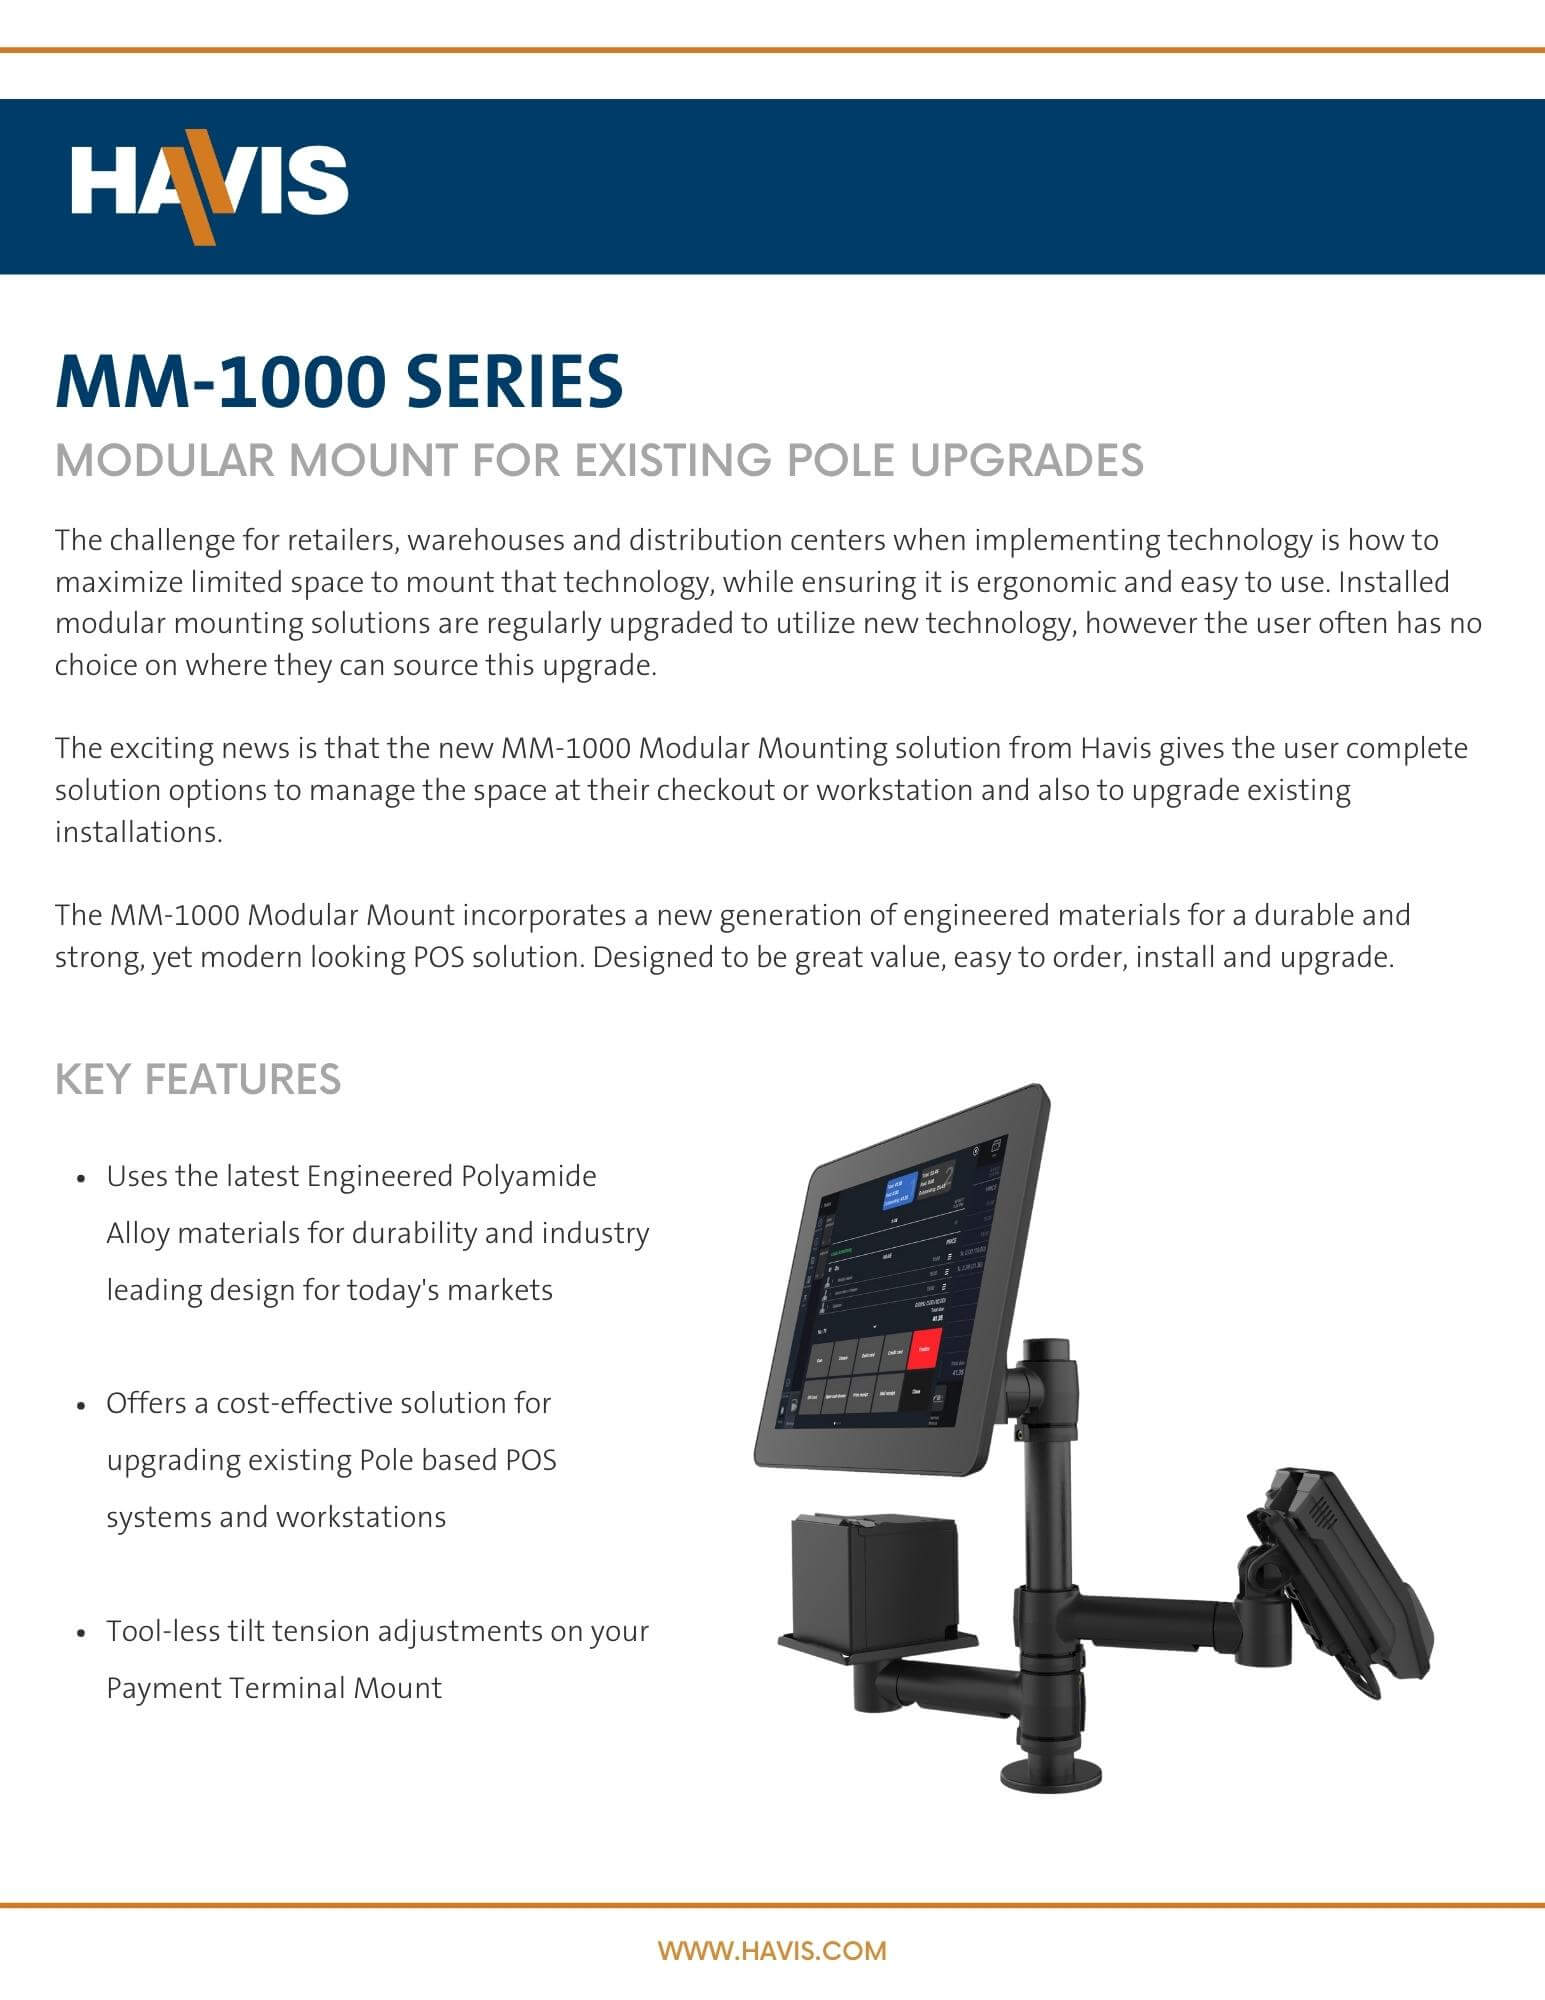 MM-1000 Product Guide - Existing Installations